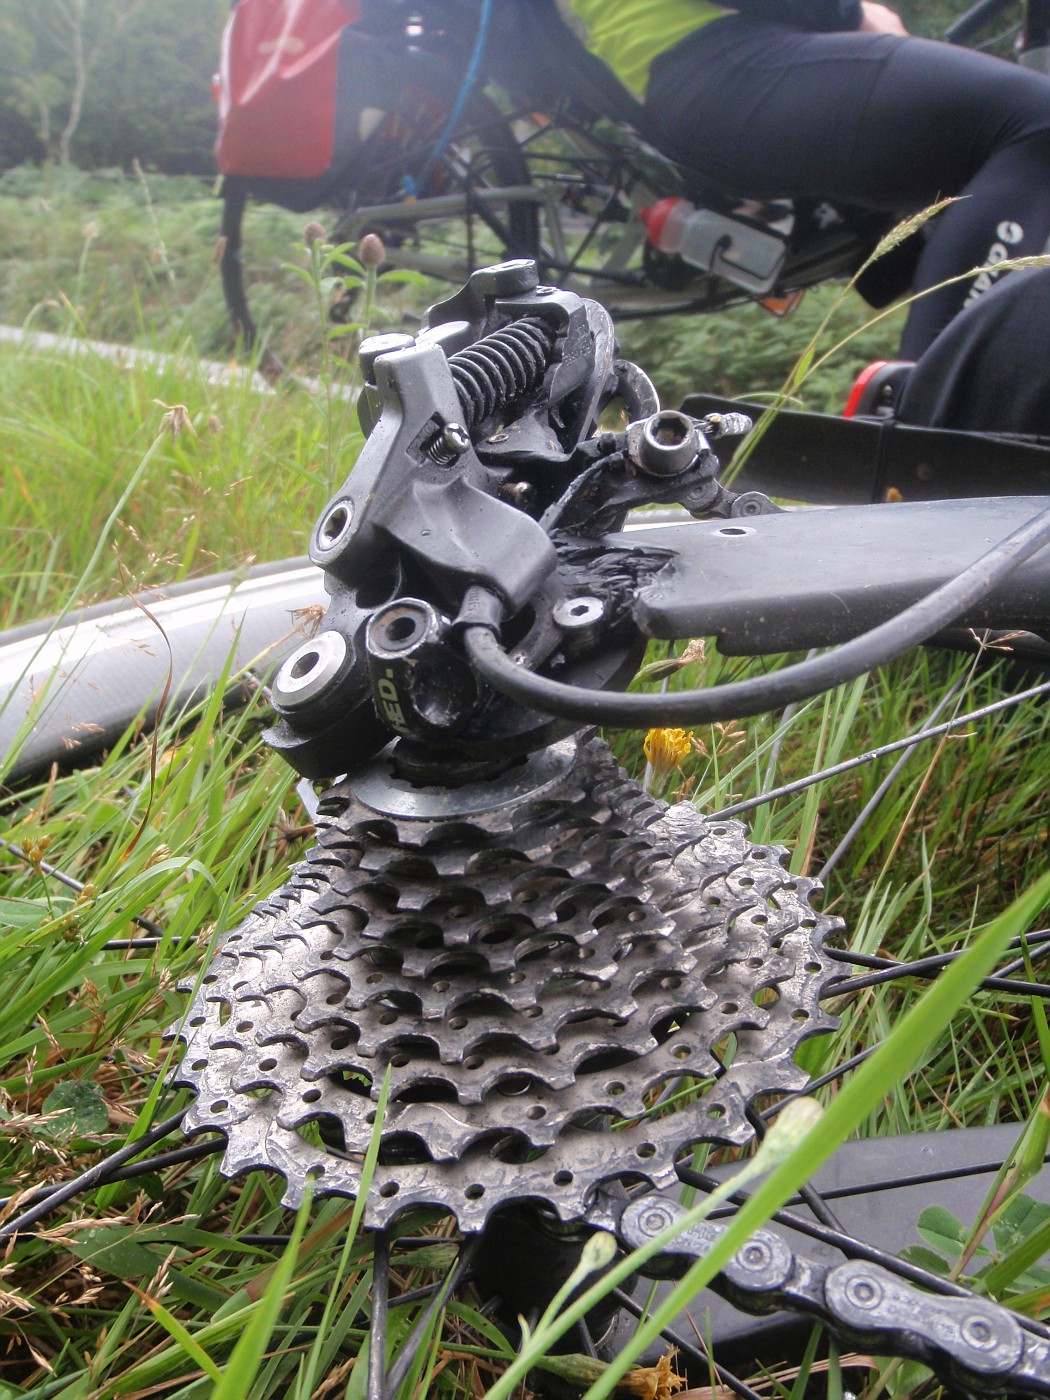 The right chain-stay is broken! :-(